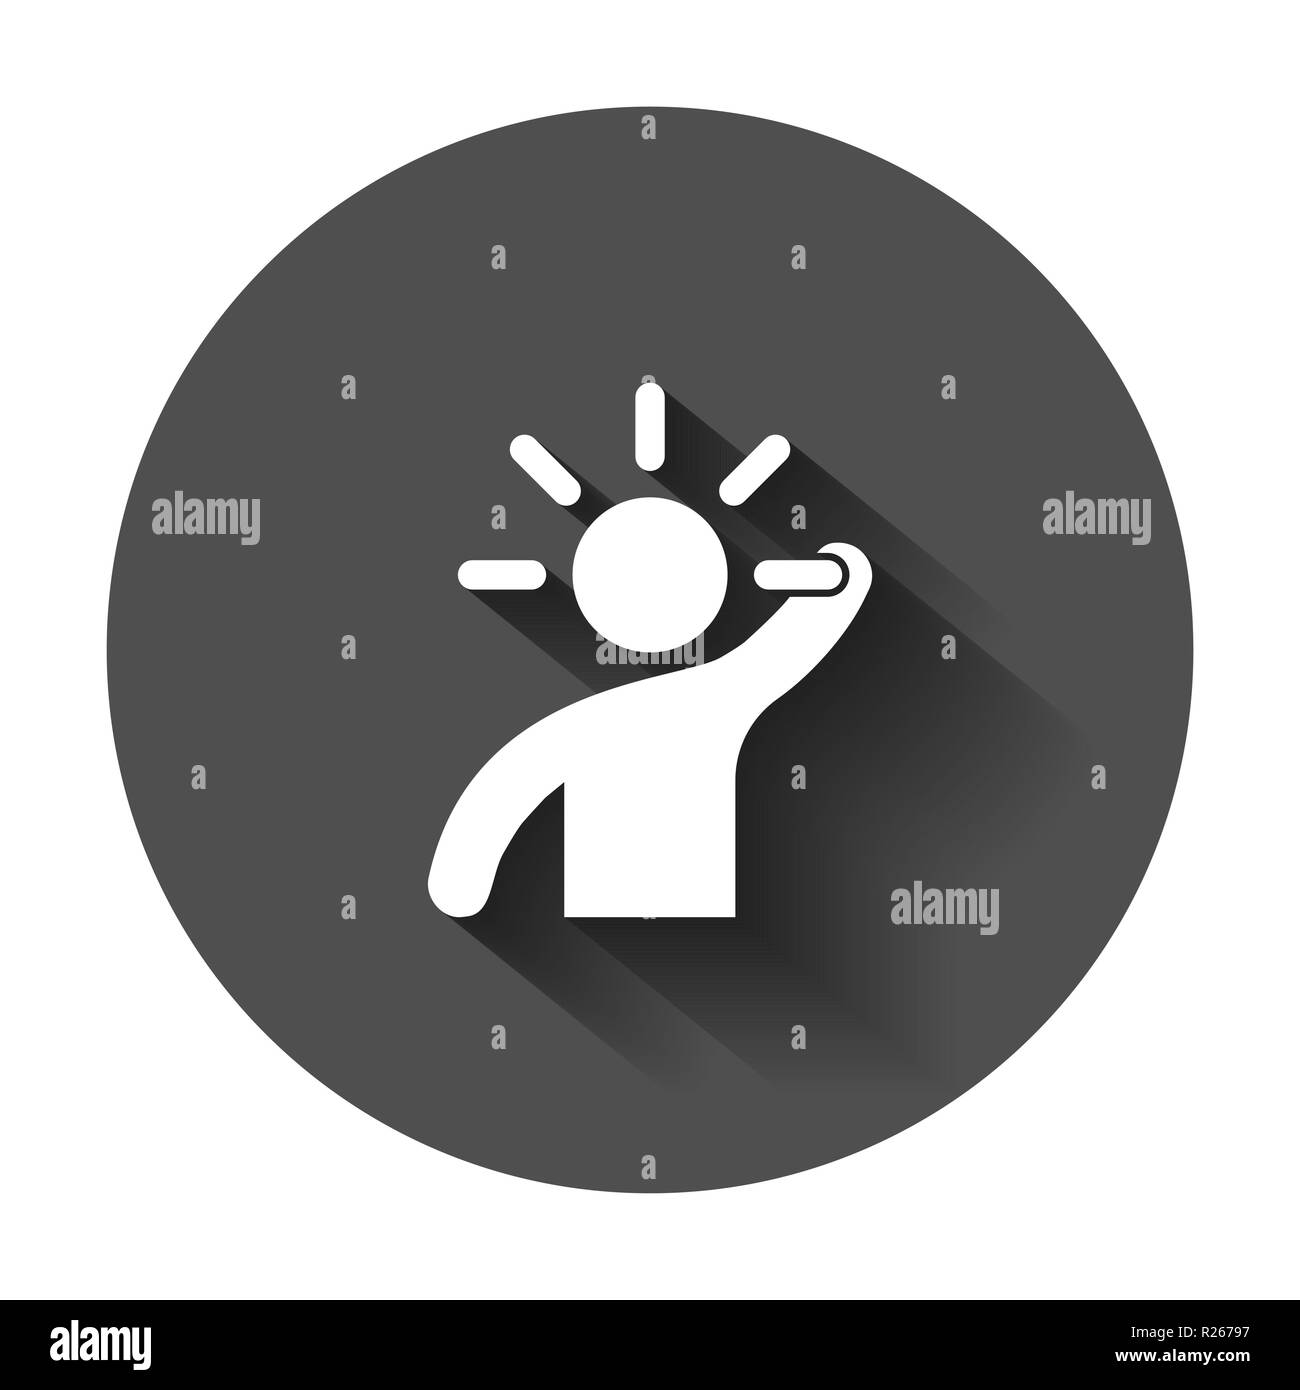 Mind people icon in flat style. Human frustration vector illustration with long shadow. Mind thinking business concept. Stock Vector